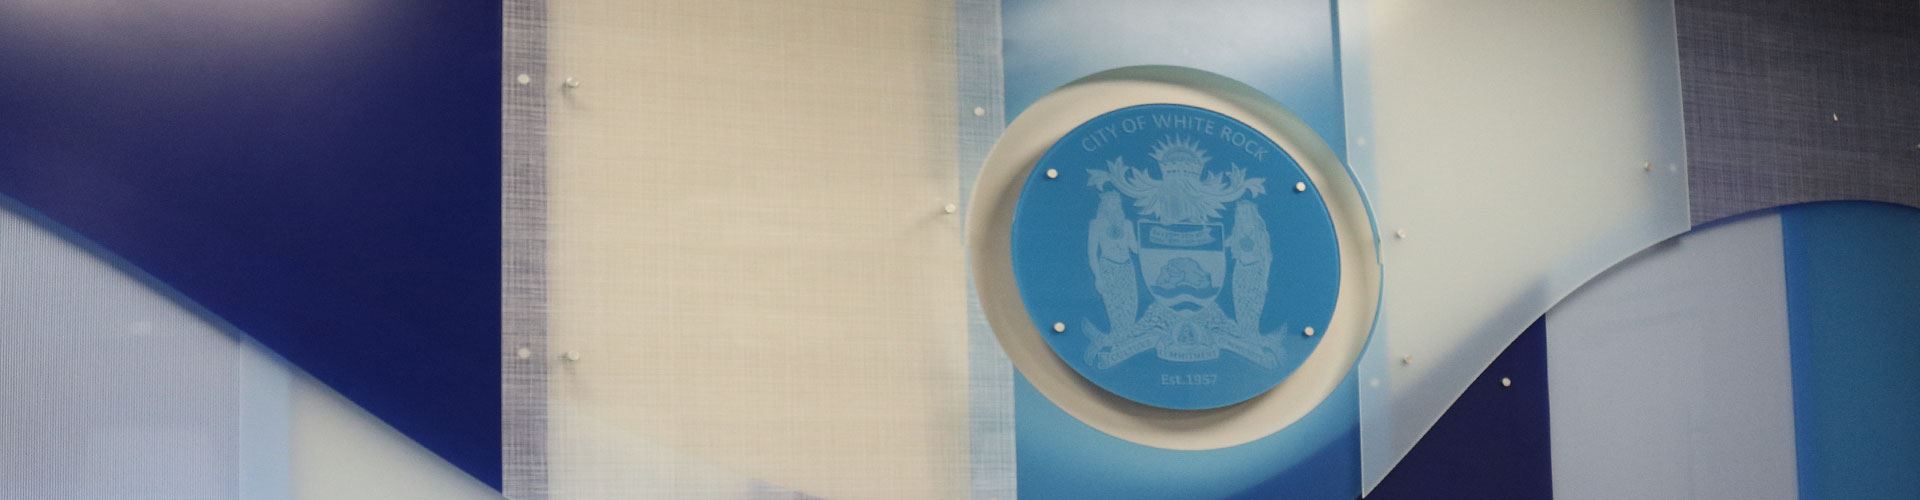 White Rock Council Chambers, Coat of Arms wall art